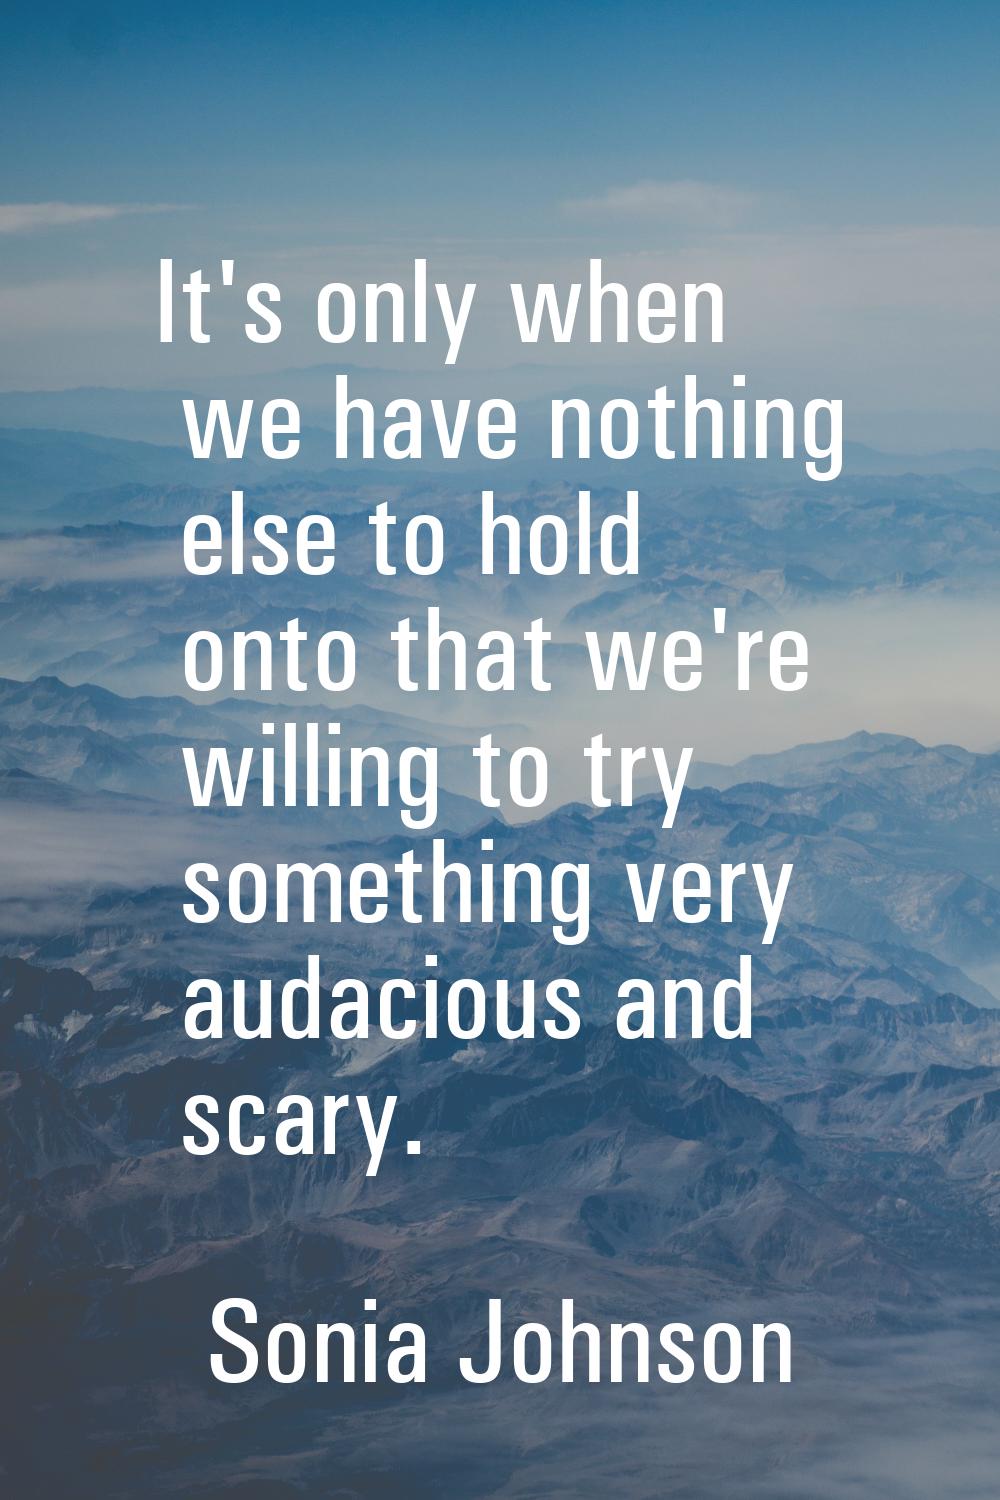 It's only when we have nothing else to hold onto that we're willing to try something very audacious